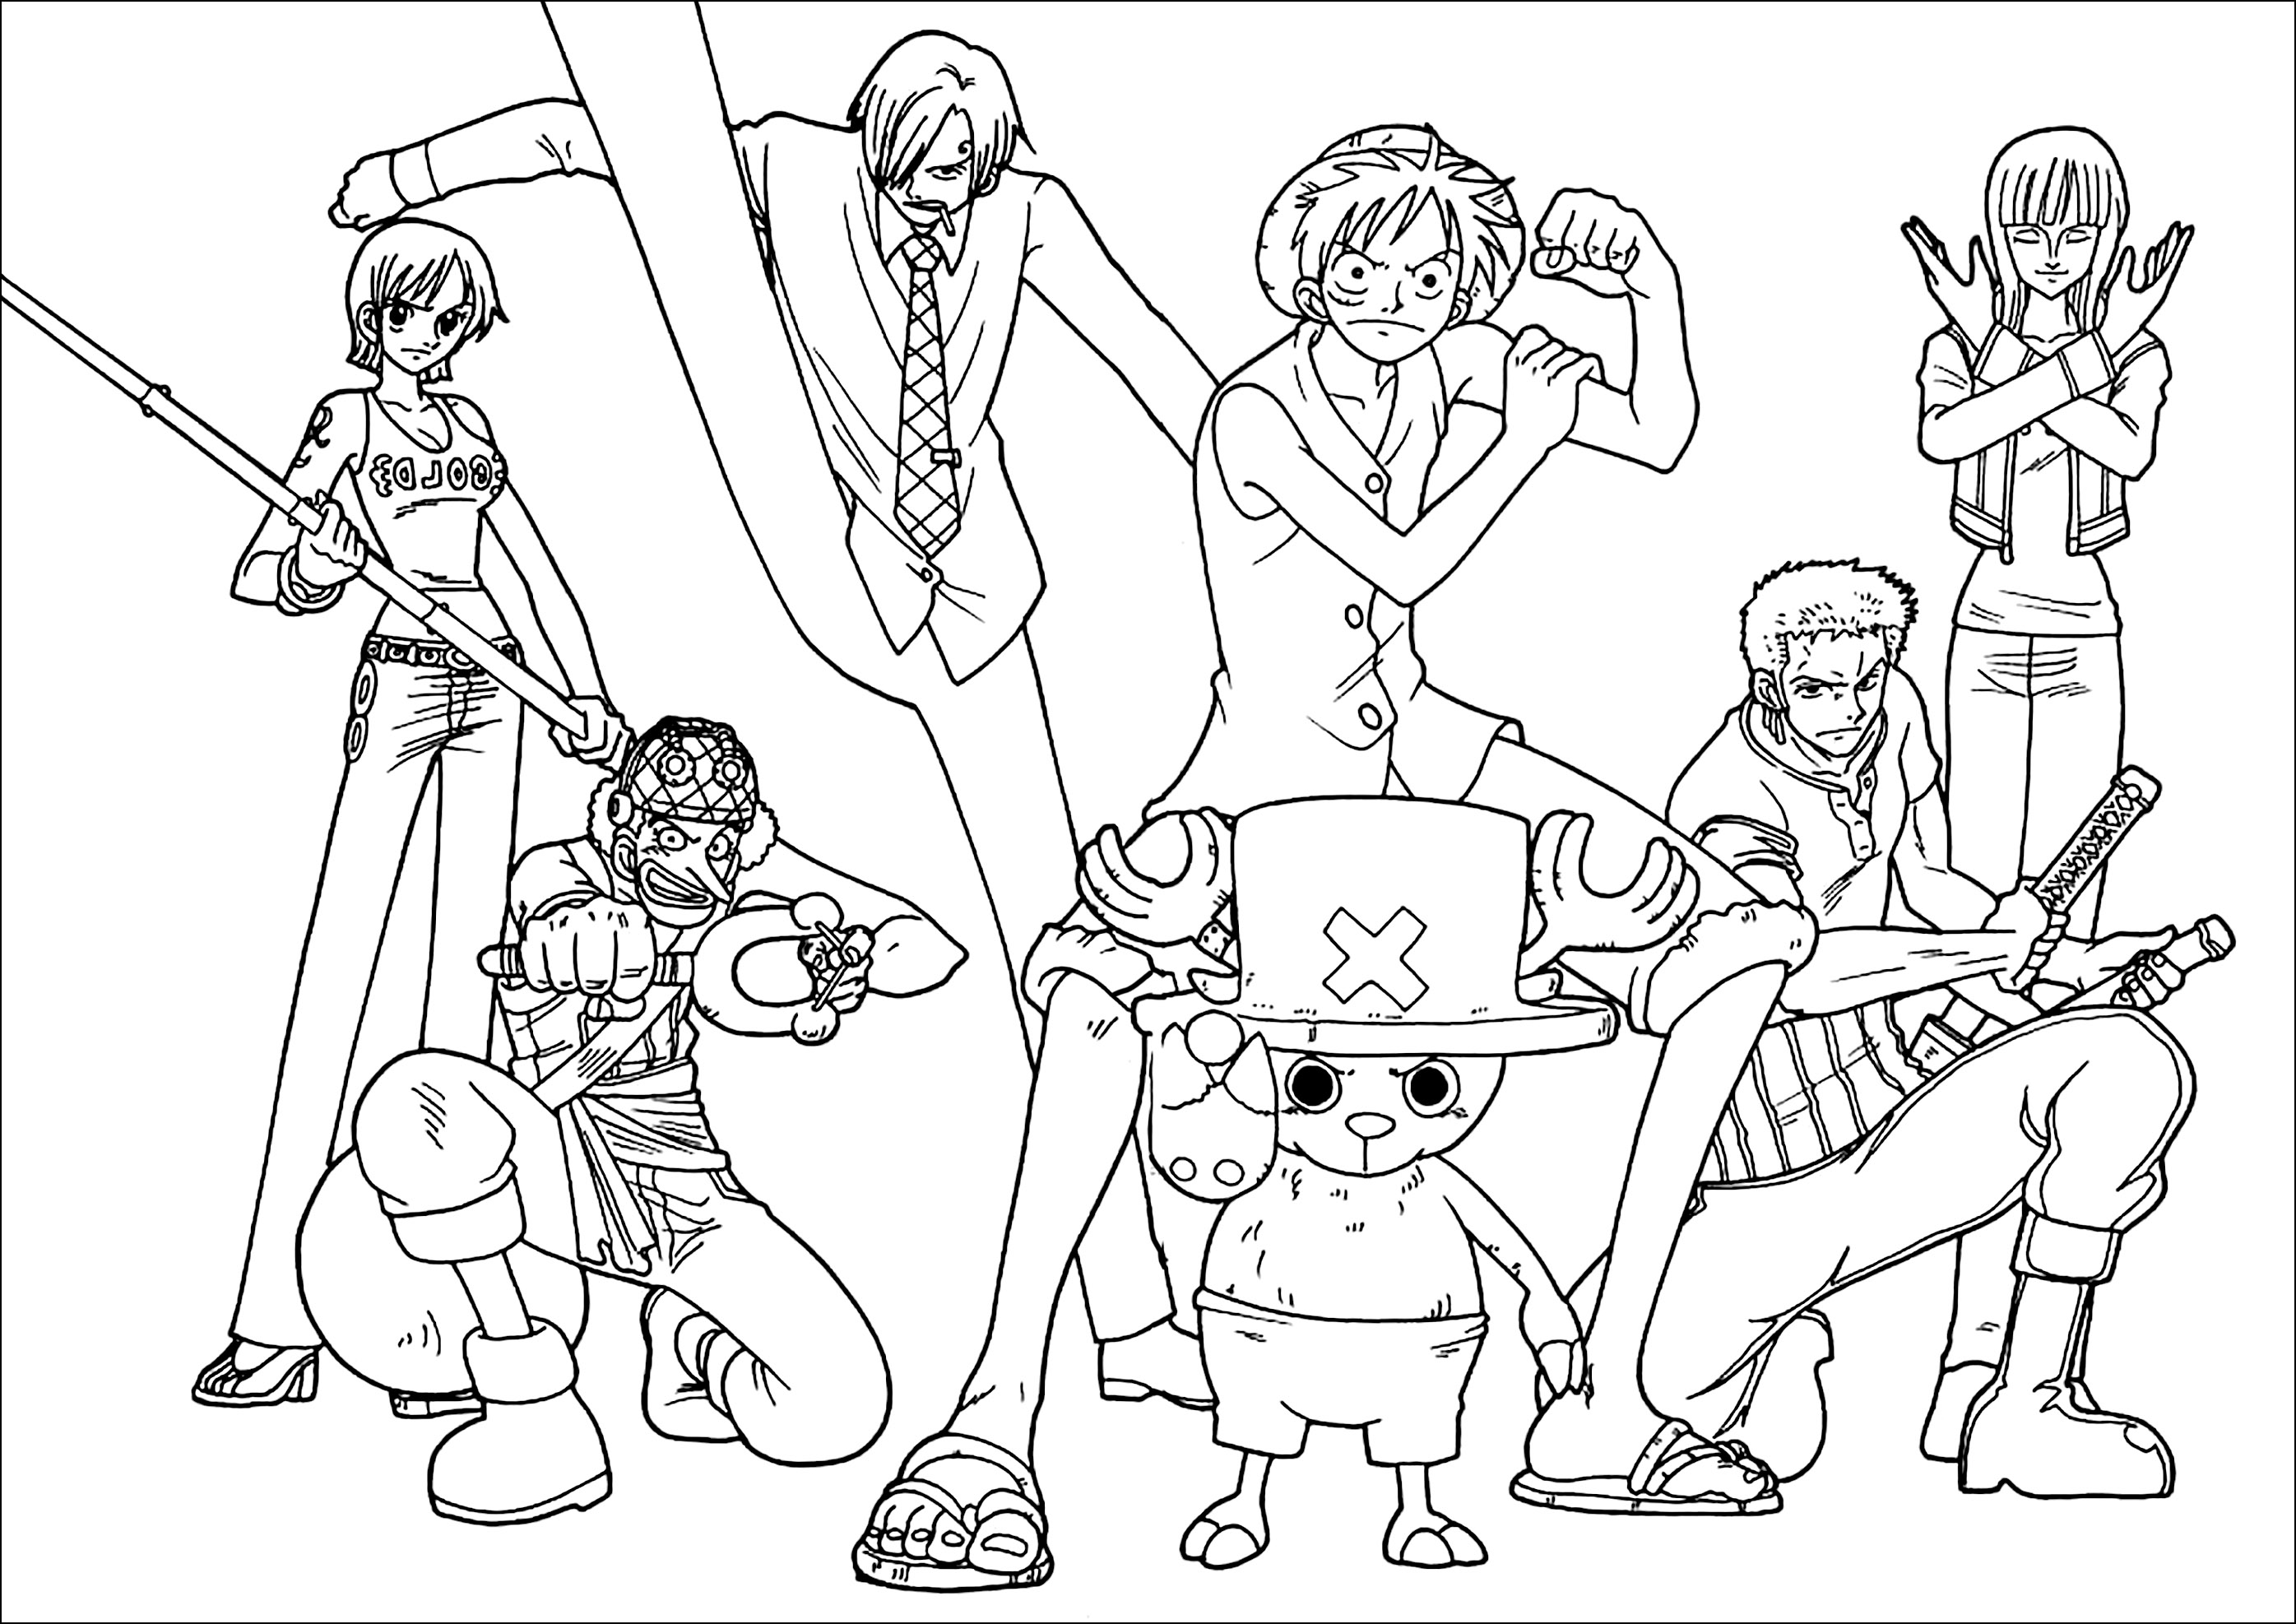 Simple One Piece coloring page for children